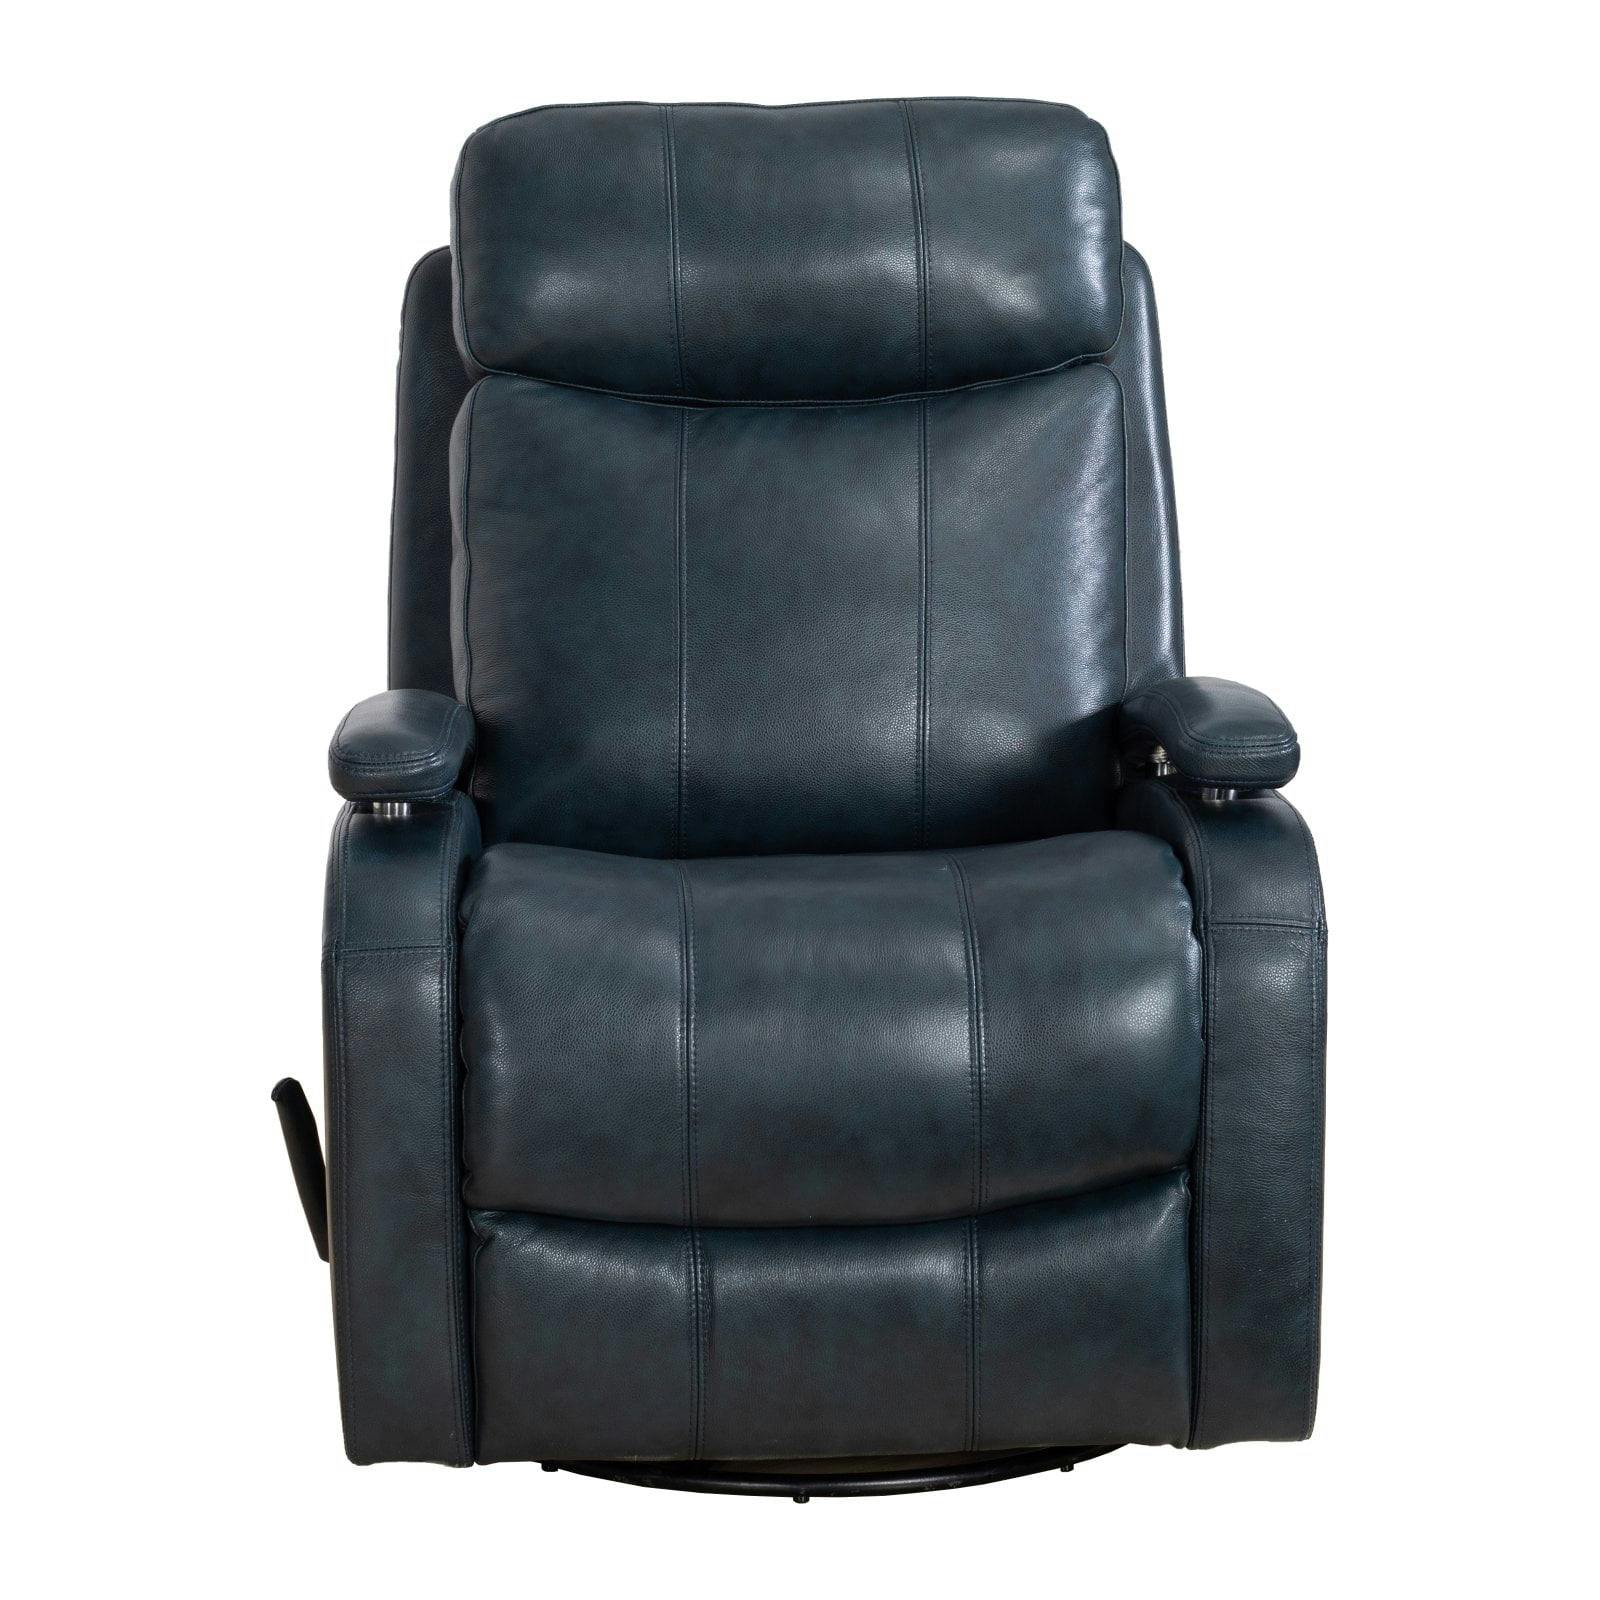 Ryegate Sapphire Blue Leather Swivel Recliner with Wood Accents